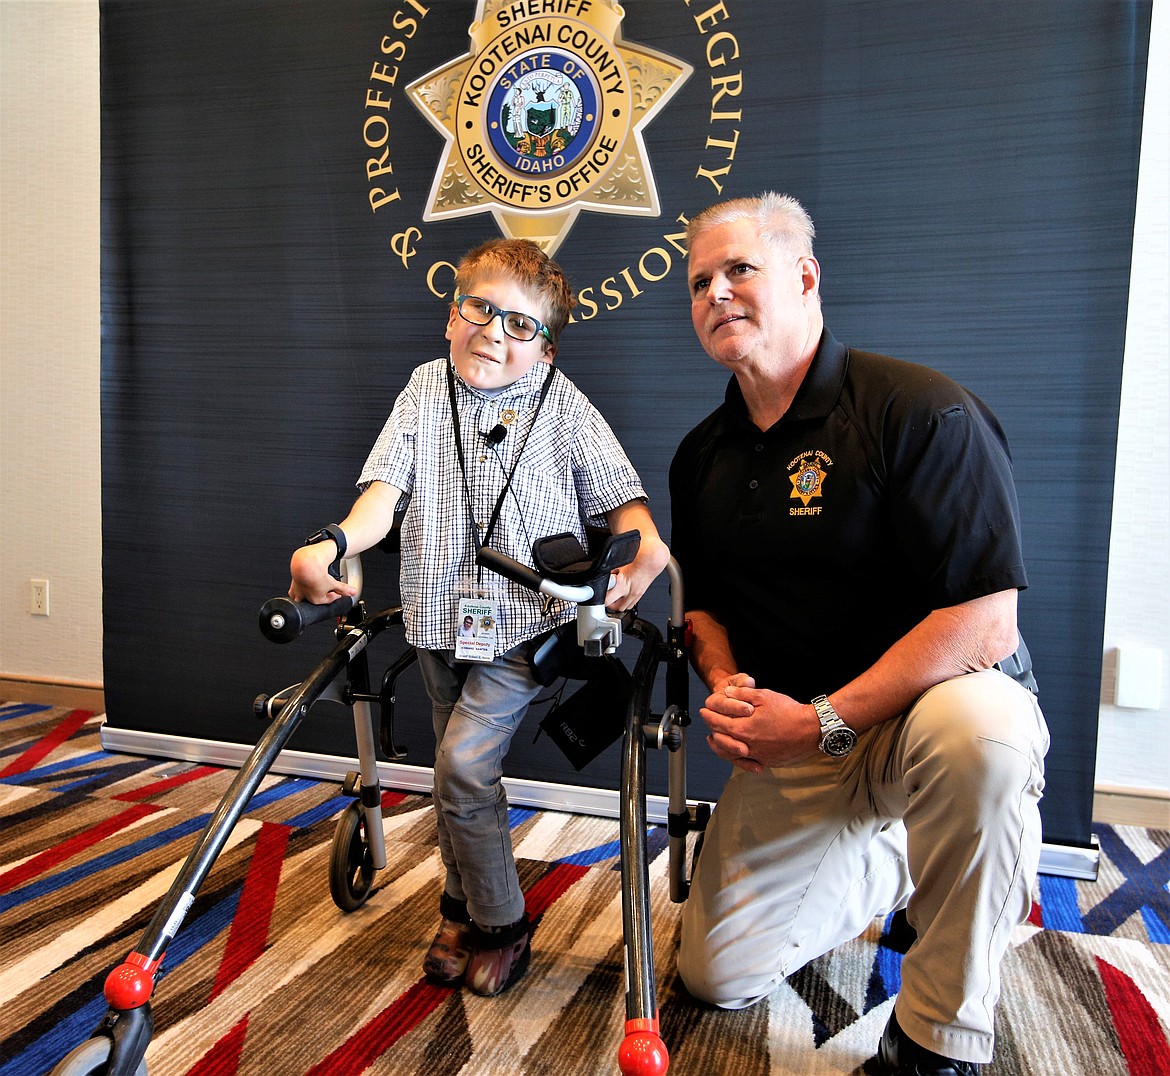 Kootenai County Sheriff Bob Norris poses with Edward Vawter after deputizing him during a special ceremony on Thursday.